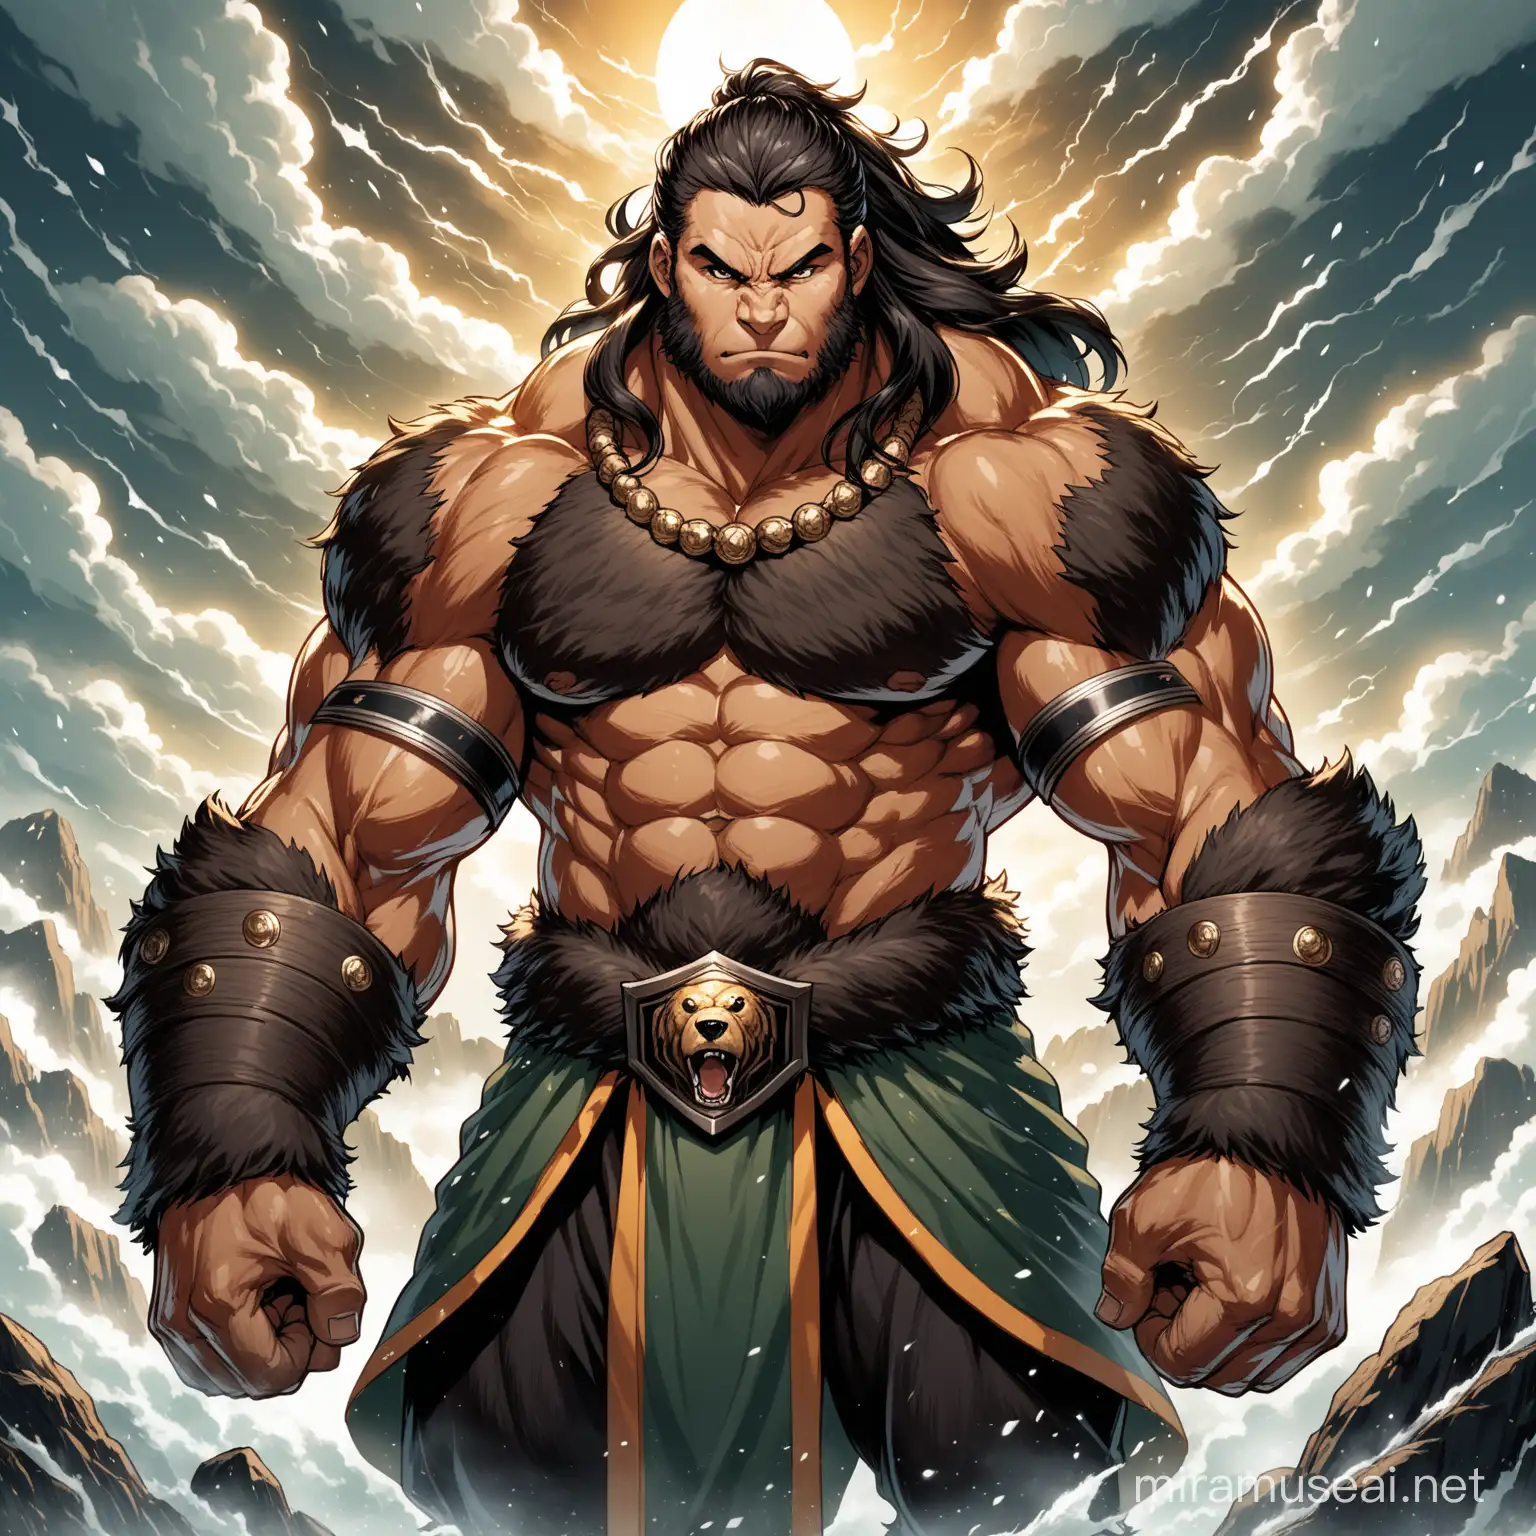 Gaurrea Vuma-Thukate, a towering Goliath with skin like mountain stone and a mane of dark hair, bears a muscular frame sculpted by years of combat and hardship. His storm-cloud eyes hold a fierce determination tempered by compassion, while his calloused hands speak of a life lived by the sword—or by his fists. Clad in rugged garments adorned with trophies of past victories, Gaurrea's proud countenance belies a warmth that shines through his stern exterior, a testament to his resilience and indomitable spirit.